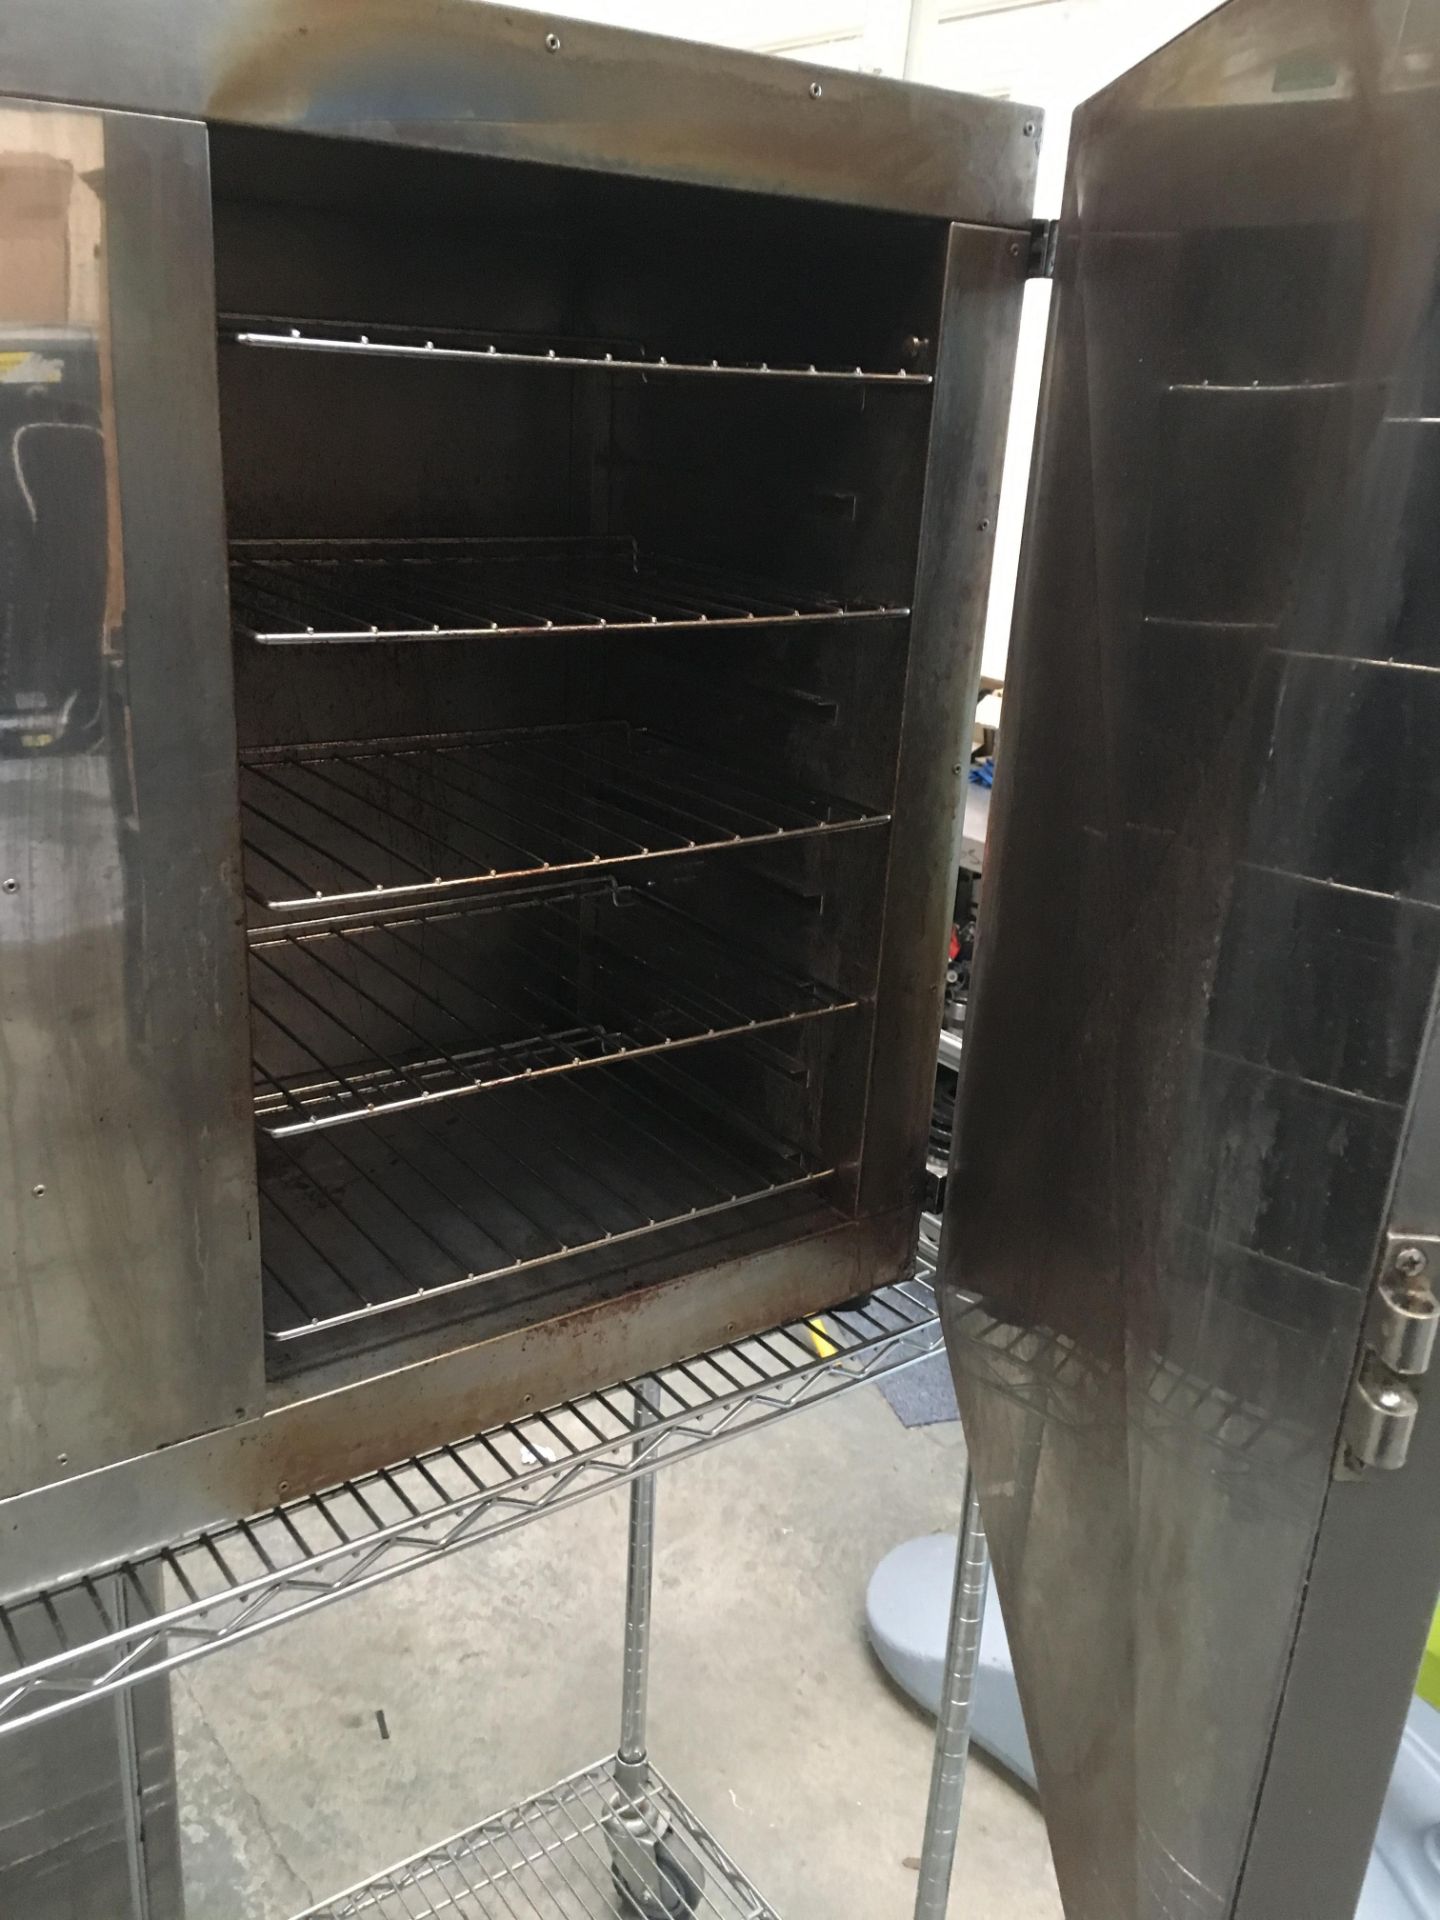 Convotherm Convection Oven 3 Phase - Image 2 of 2